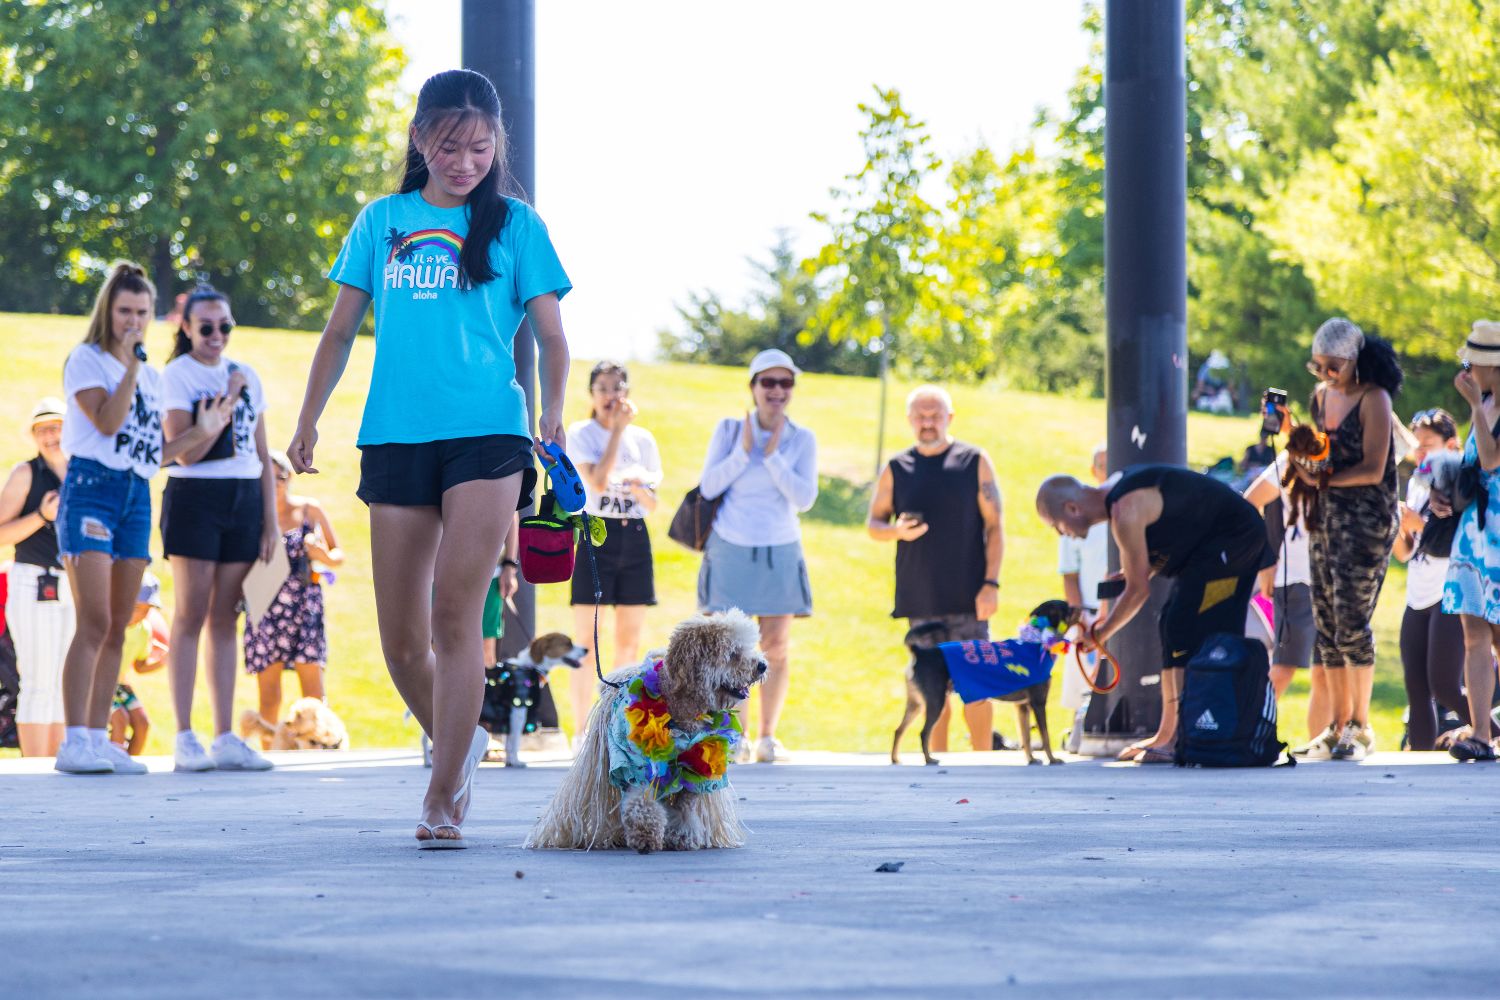 Paws in the Park is back in Toronto this summer